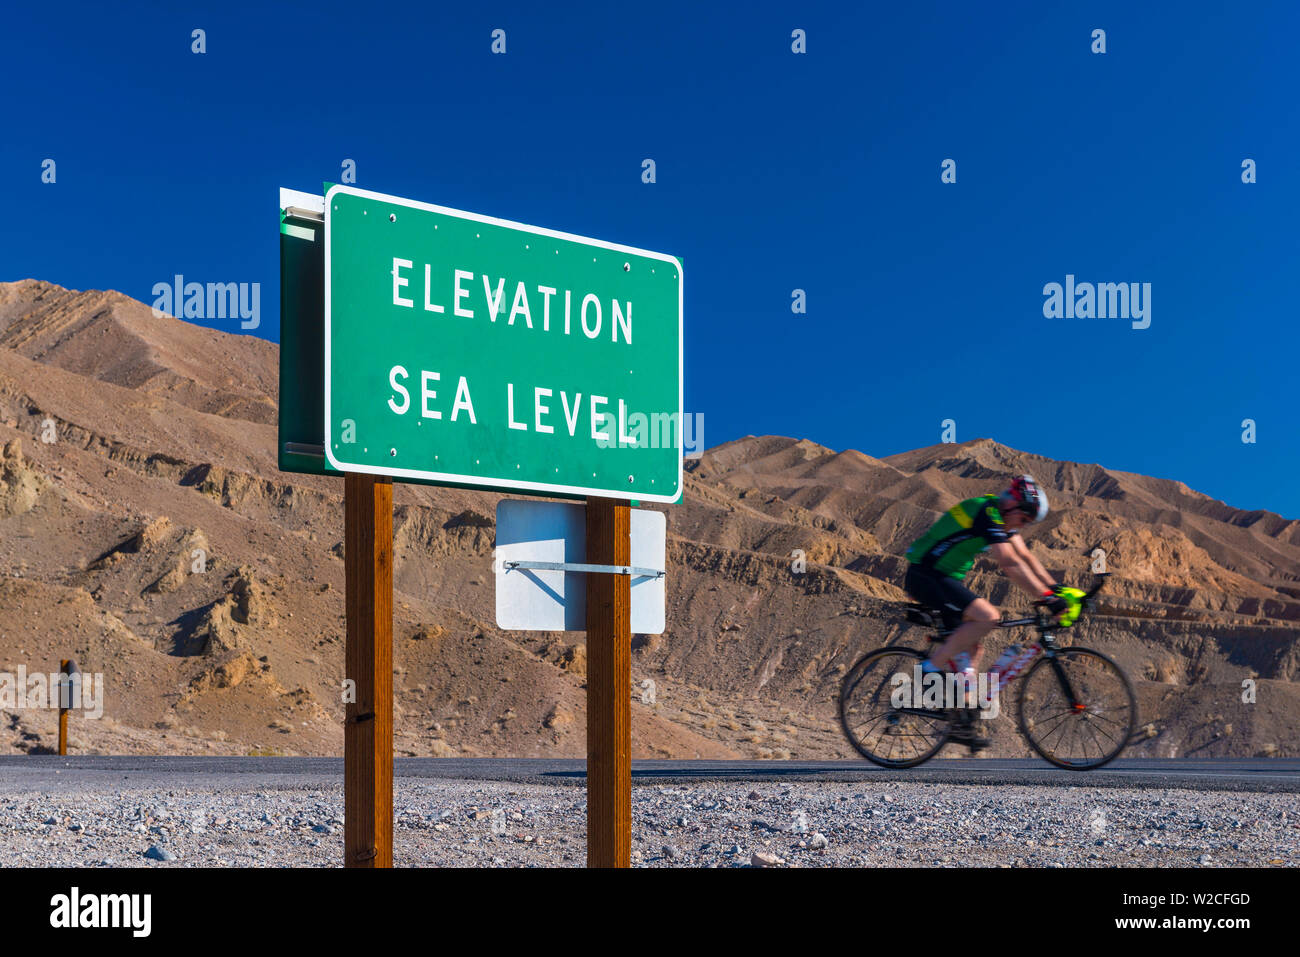 USA, California, Death Valley National Park, Elevation Sea Level sign Stock Photo